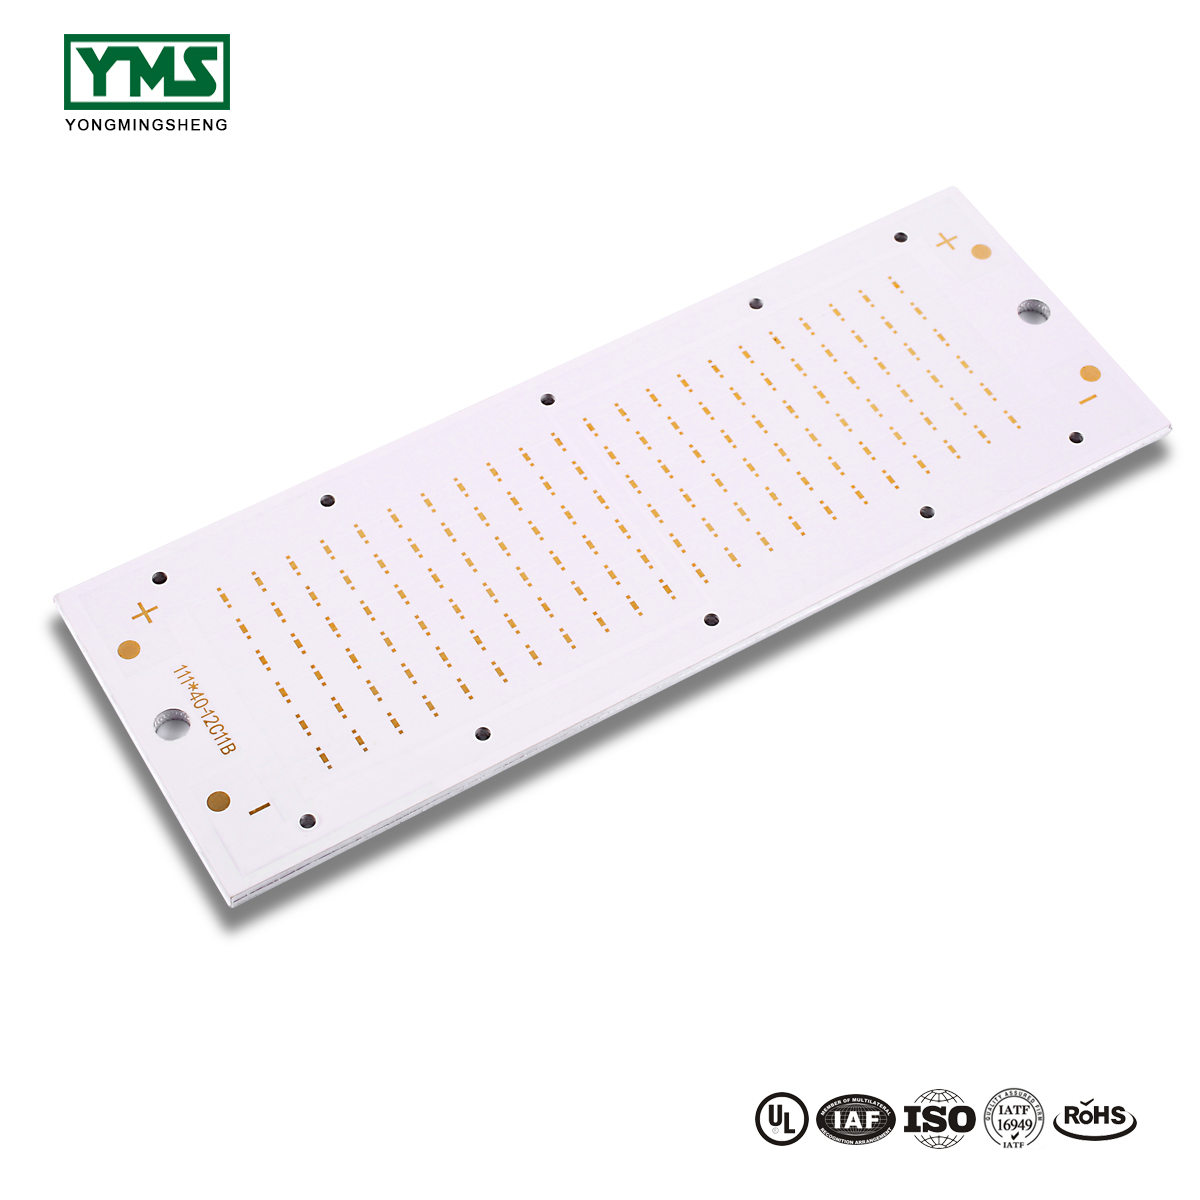 Competitive Price for Thermoelectric Separation Car Copper Base Pcb - 1Layer Aluminum base Board | YMSPCB – Yongmingsheng